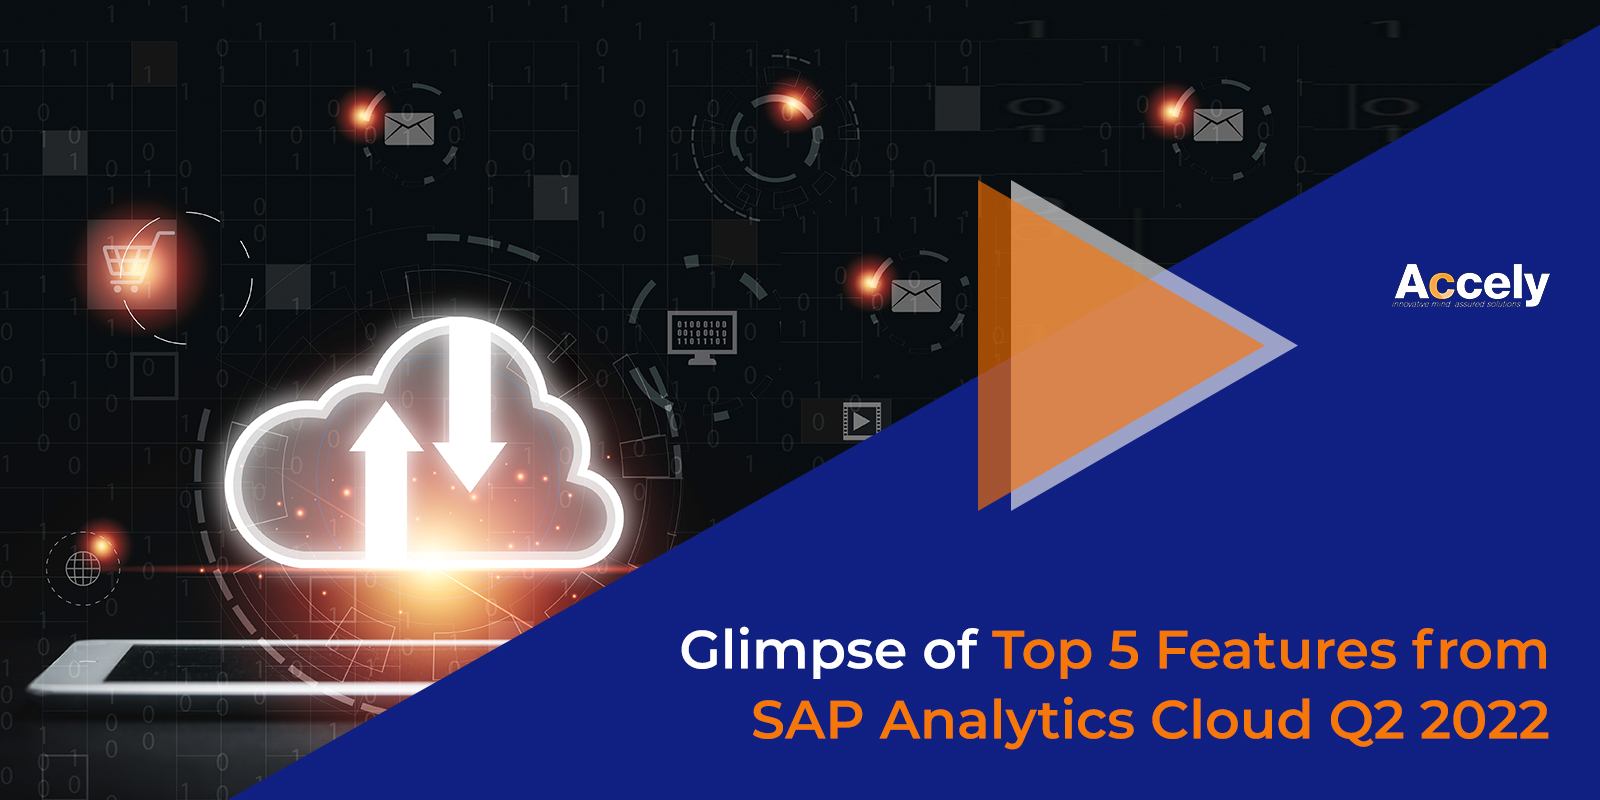 Glimpse of Top 5 Features from SAP Analytics Cloud Q2 2022